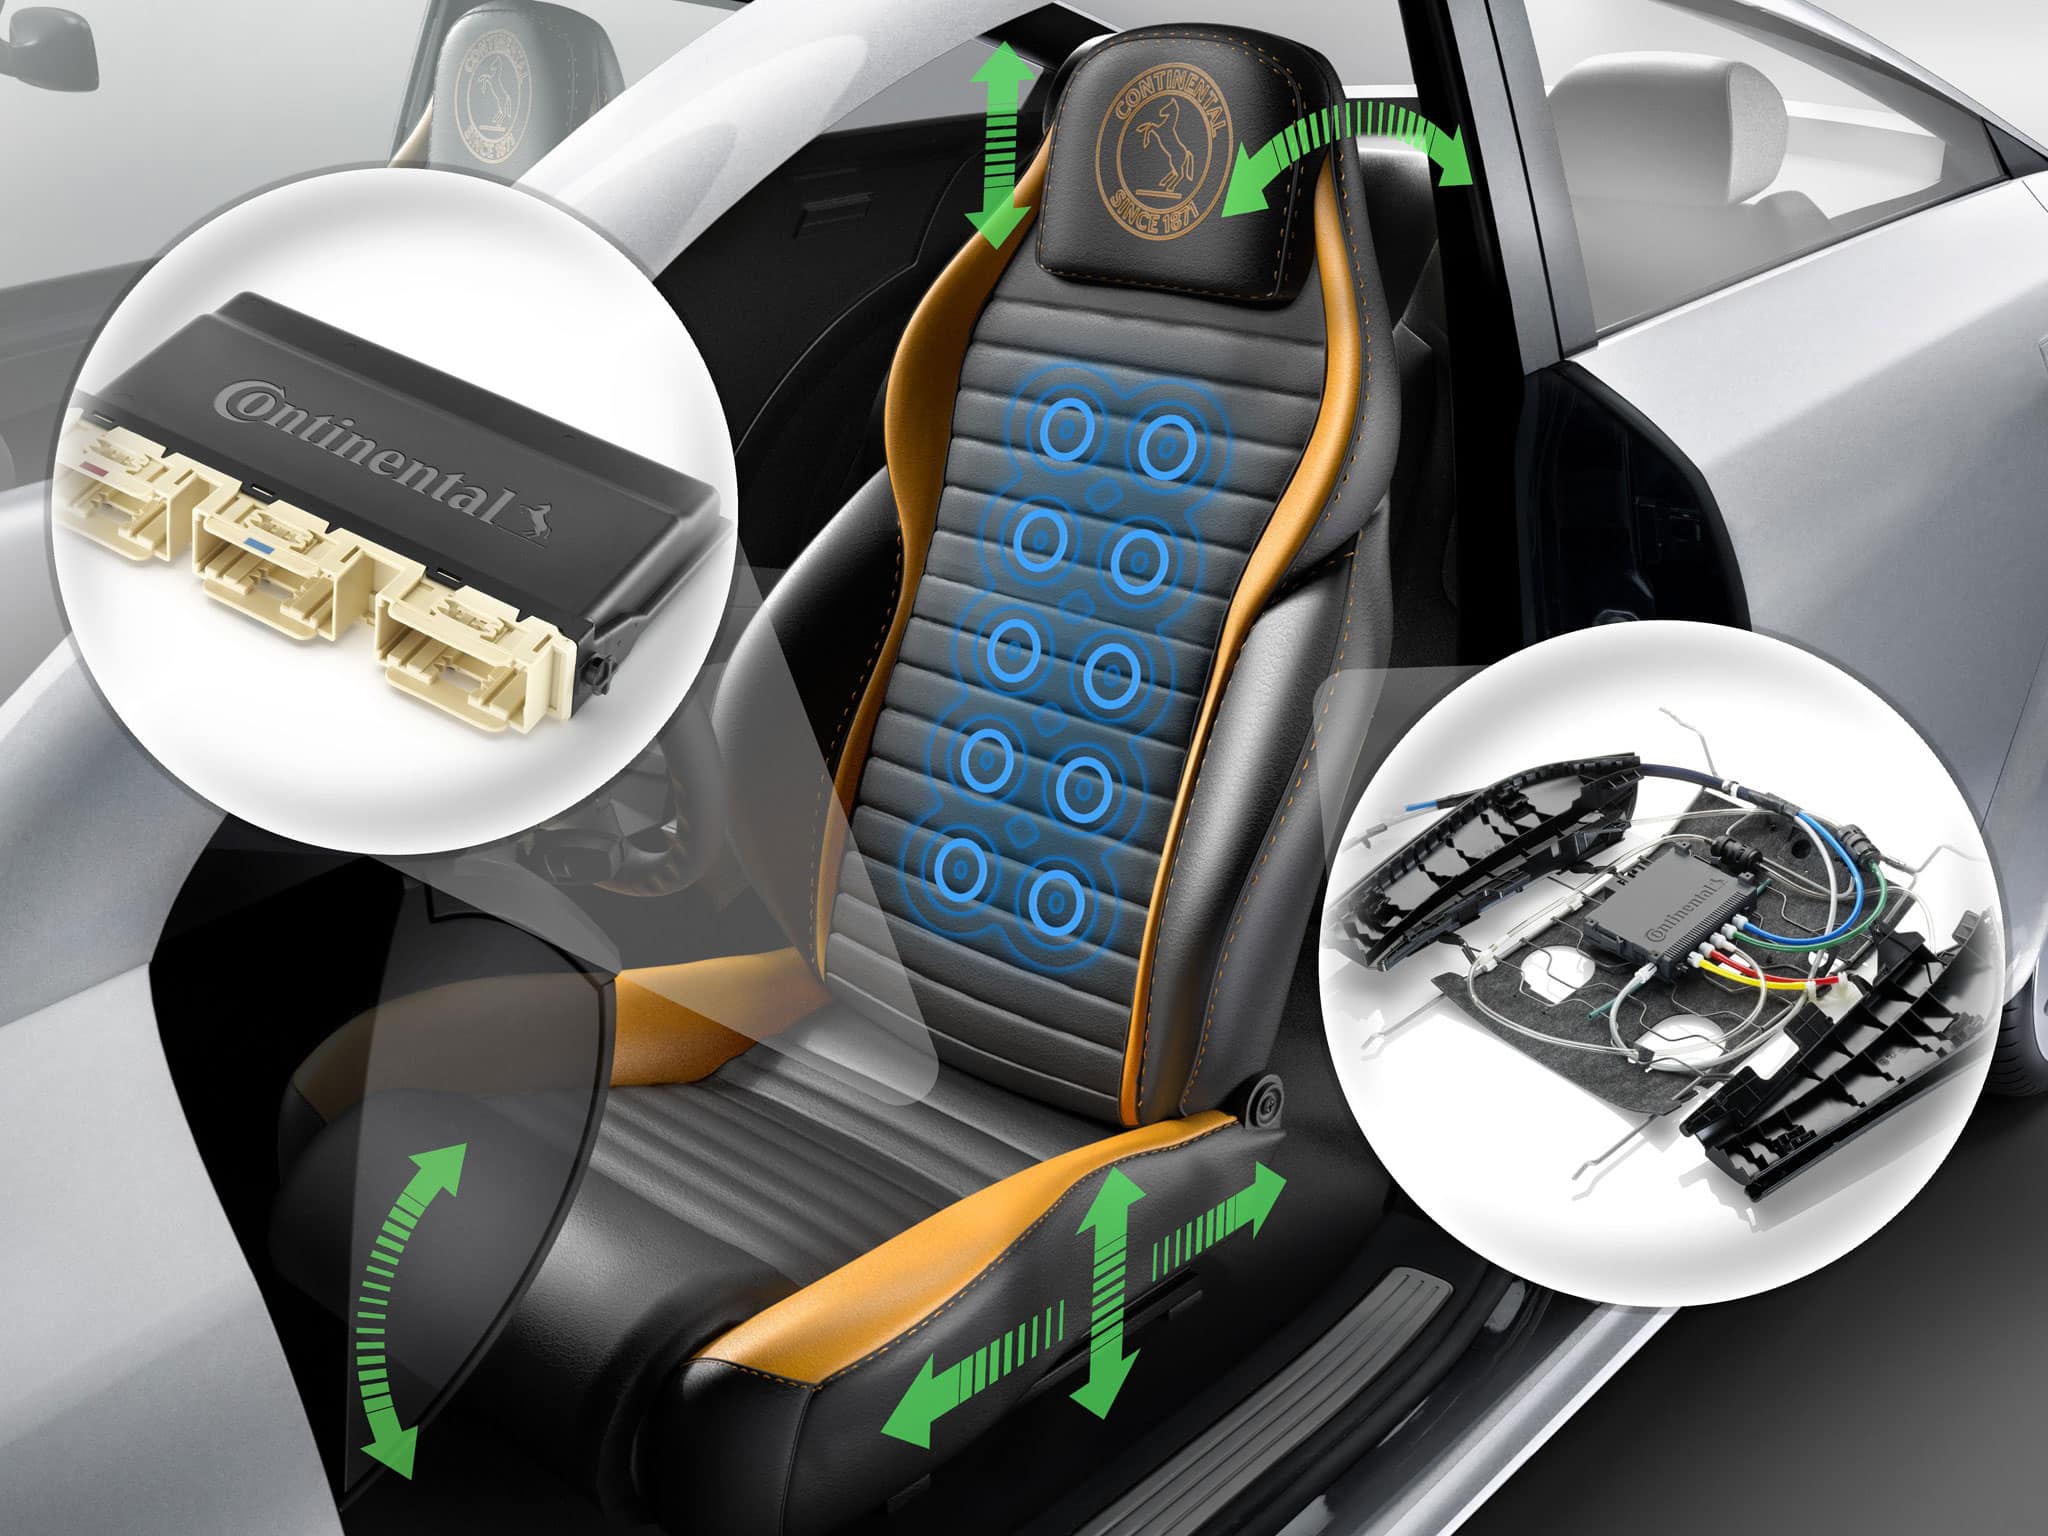 https://conti-engineering.com/wp-content/uploads/2020/05/Continental_pp_SeatSystems_4-3.jpg